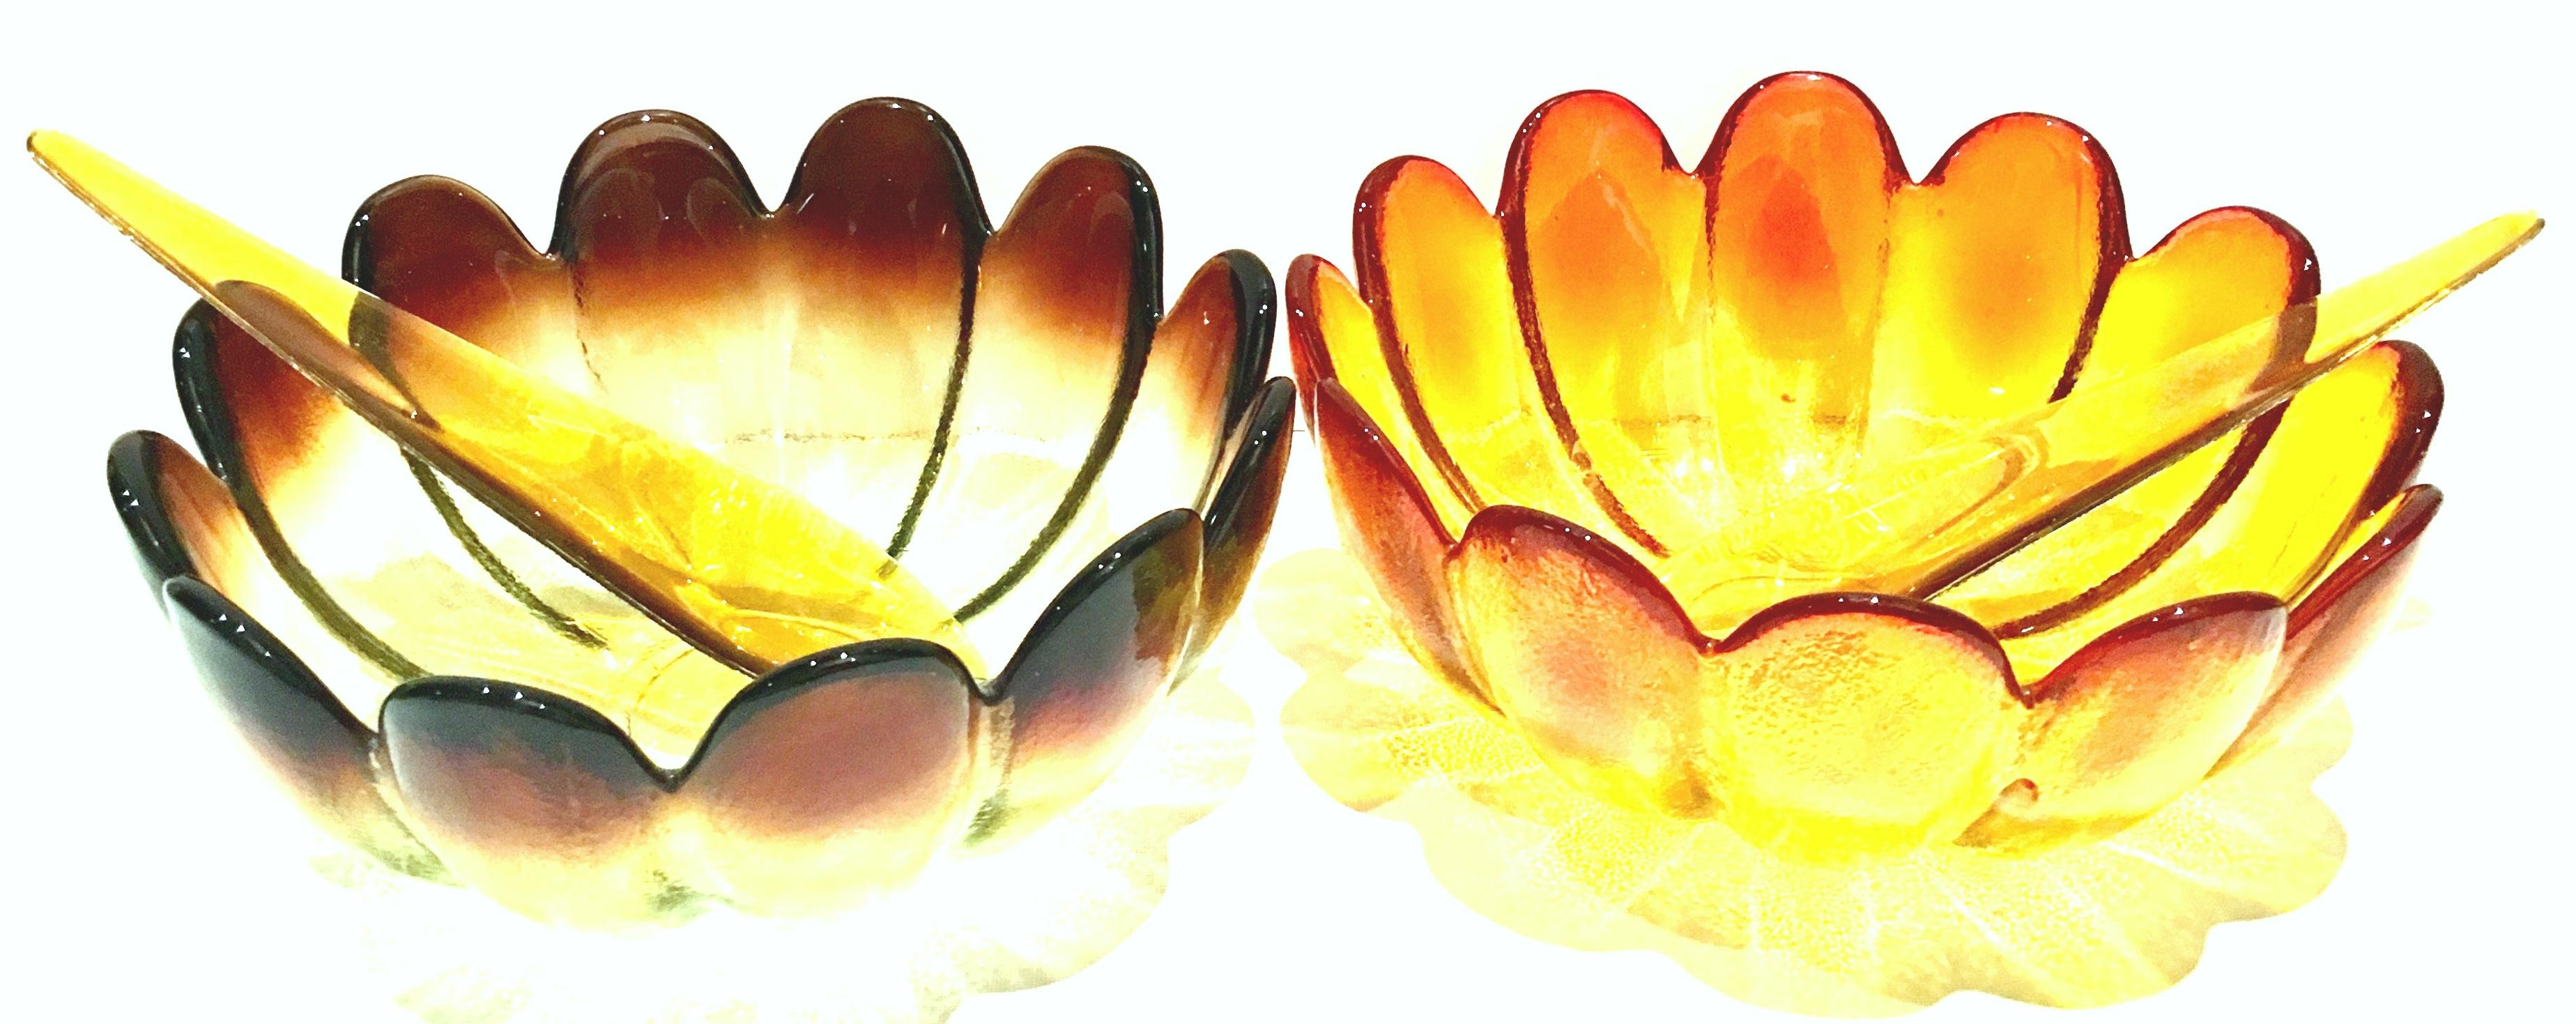 Mid-20thcentury pair of American blown glass petal-form serving bowls and Amberina Lucite salad serving fork and spoon set of four pieces by, The Indiana Glass Company. This four piece set includes, one large petal bowl in amber 